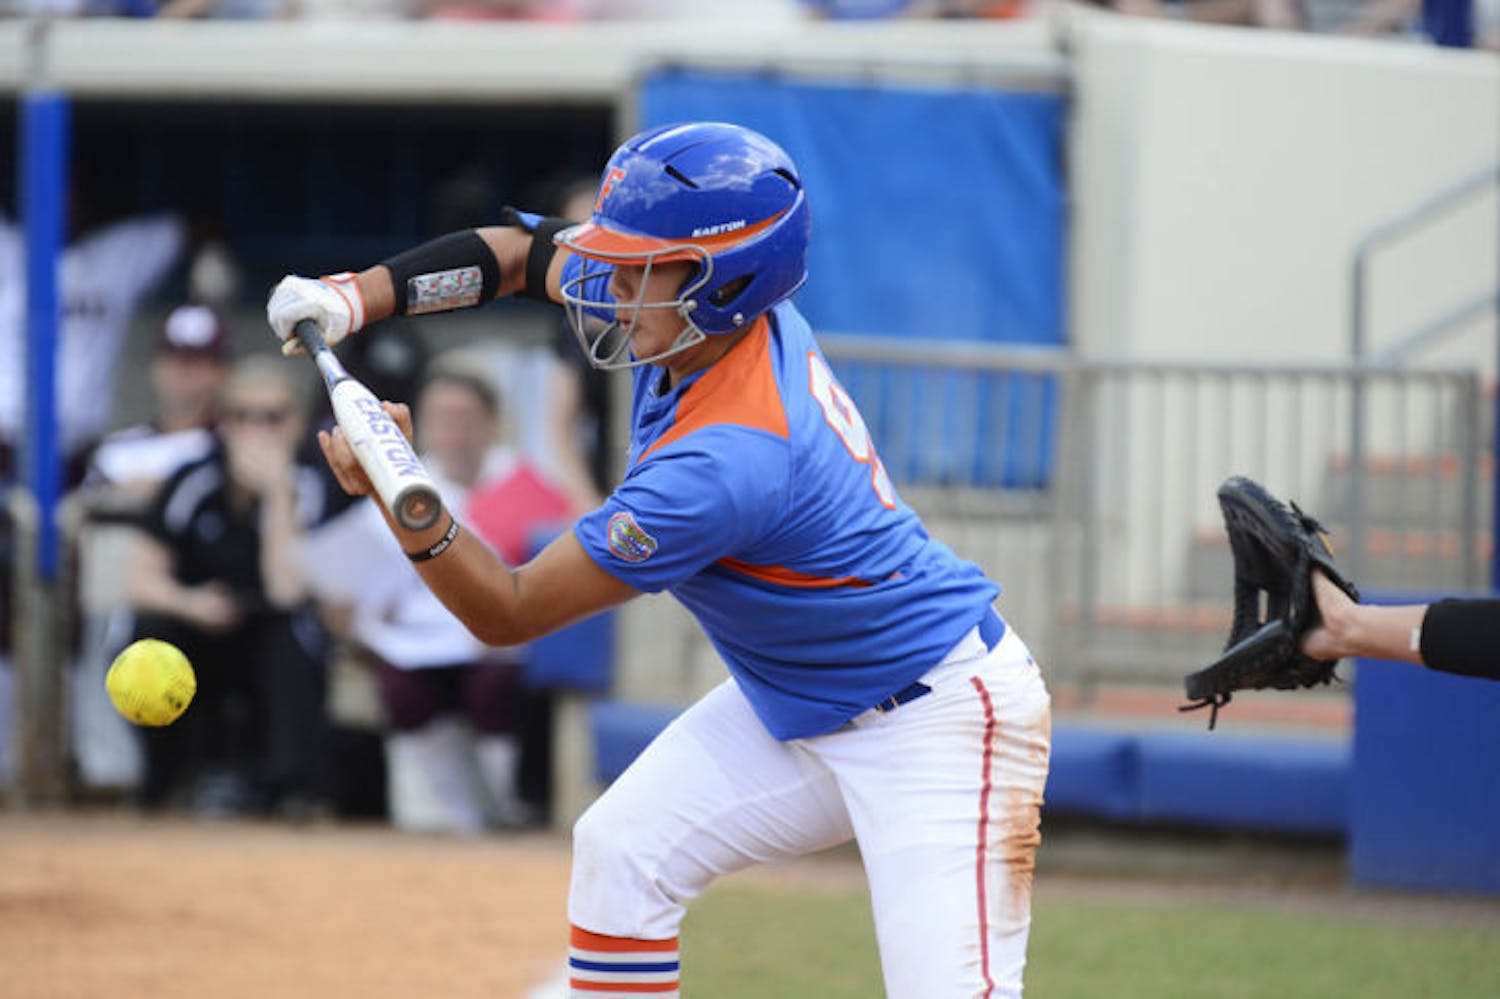 Junior third baseman Stephanie Tofft swings during Florida’s 4-2 win against Mississippi State on April 6 at Katie Seashole Pressly Stadium.&nbsp;